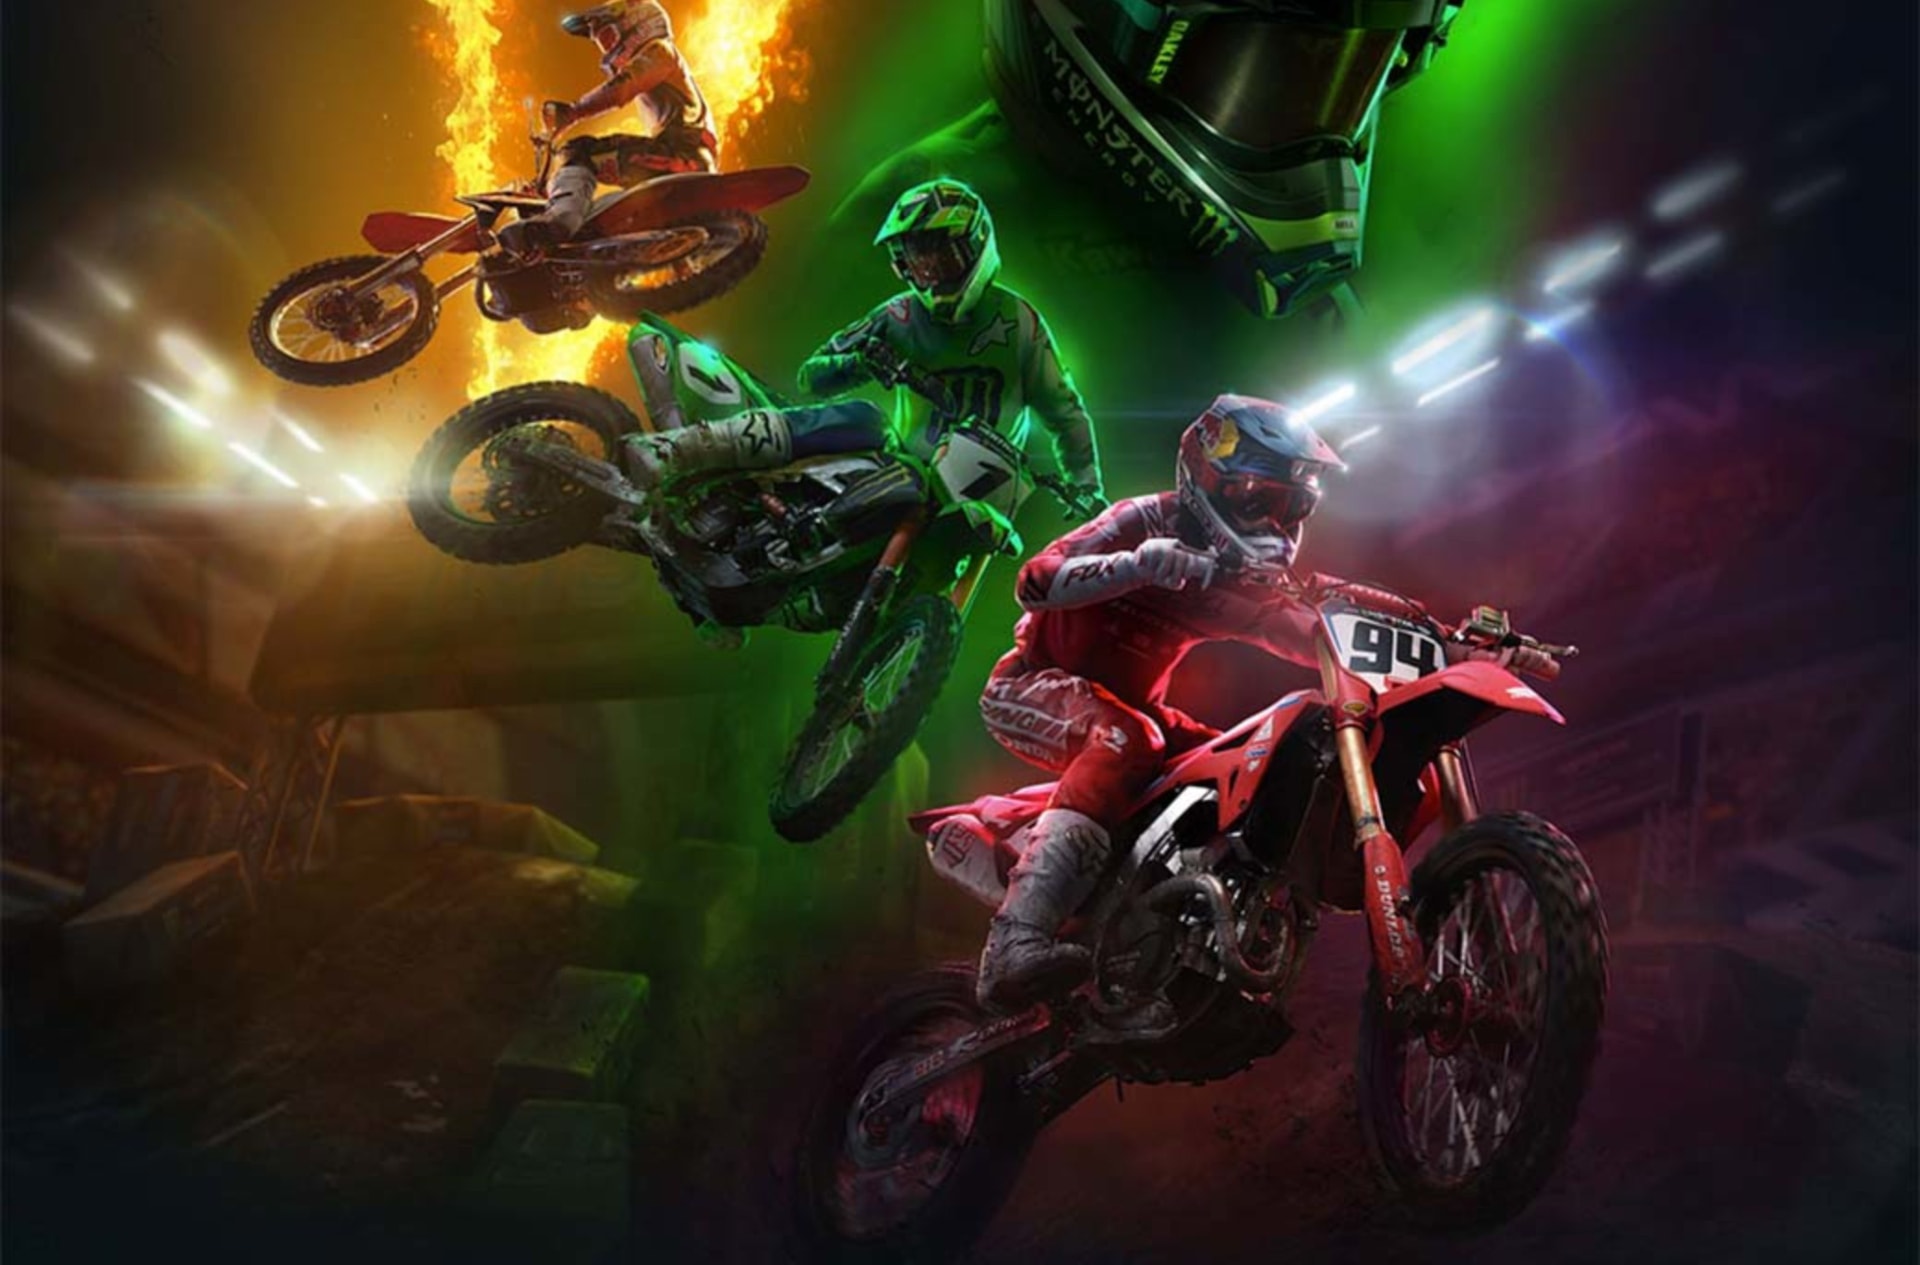 Monster Energy Supercross - The Official Videogame 4 - Xbox